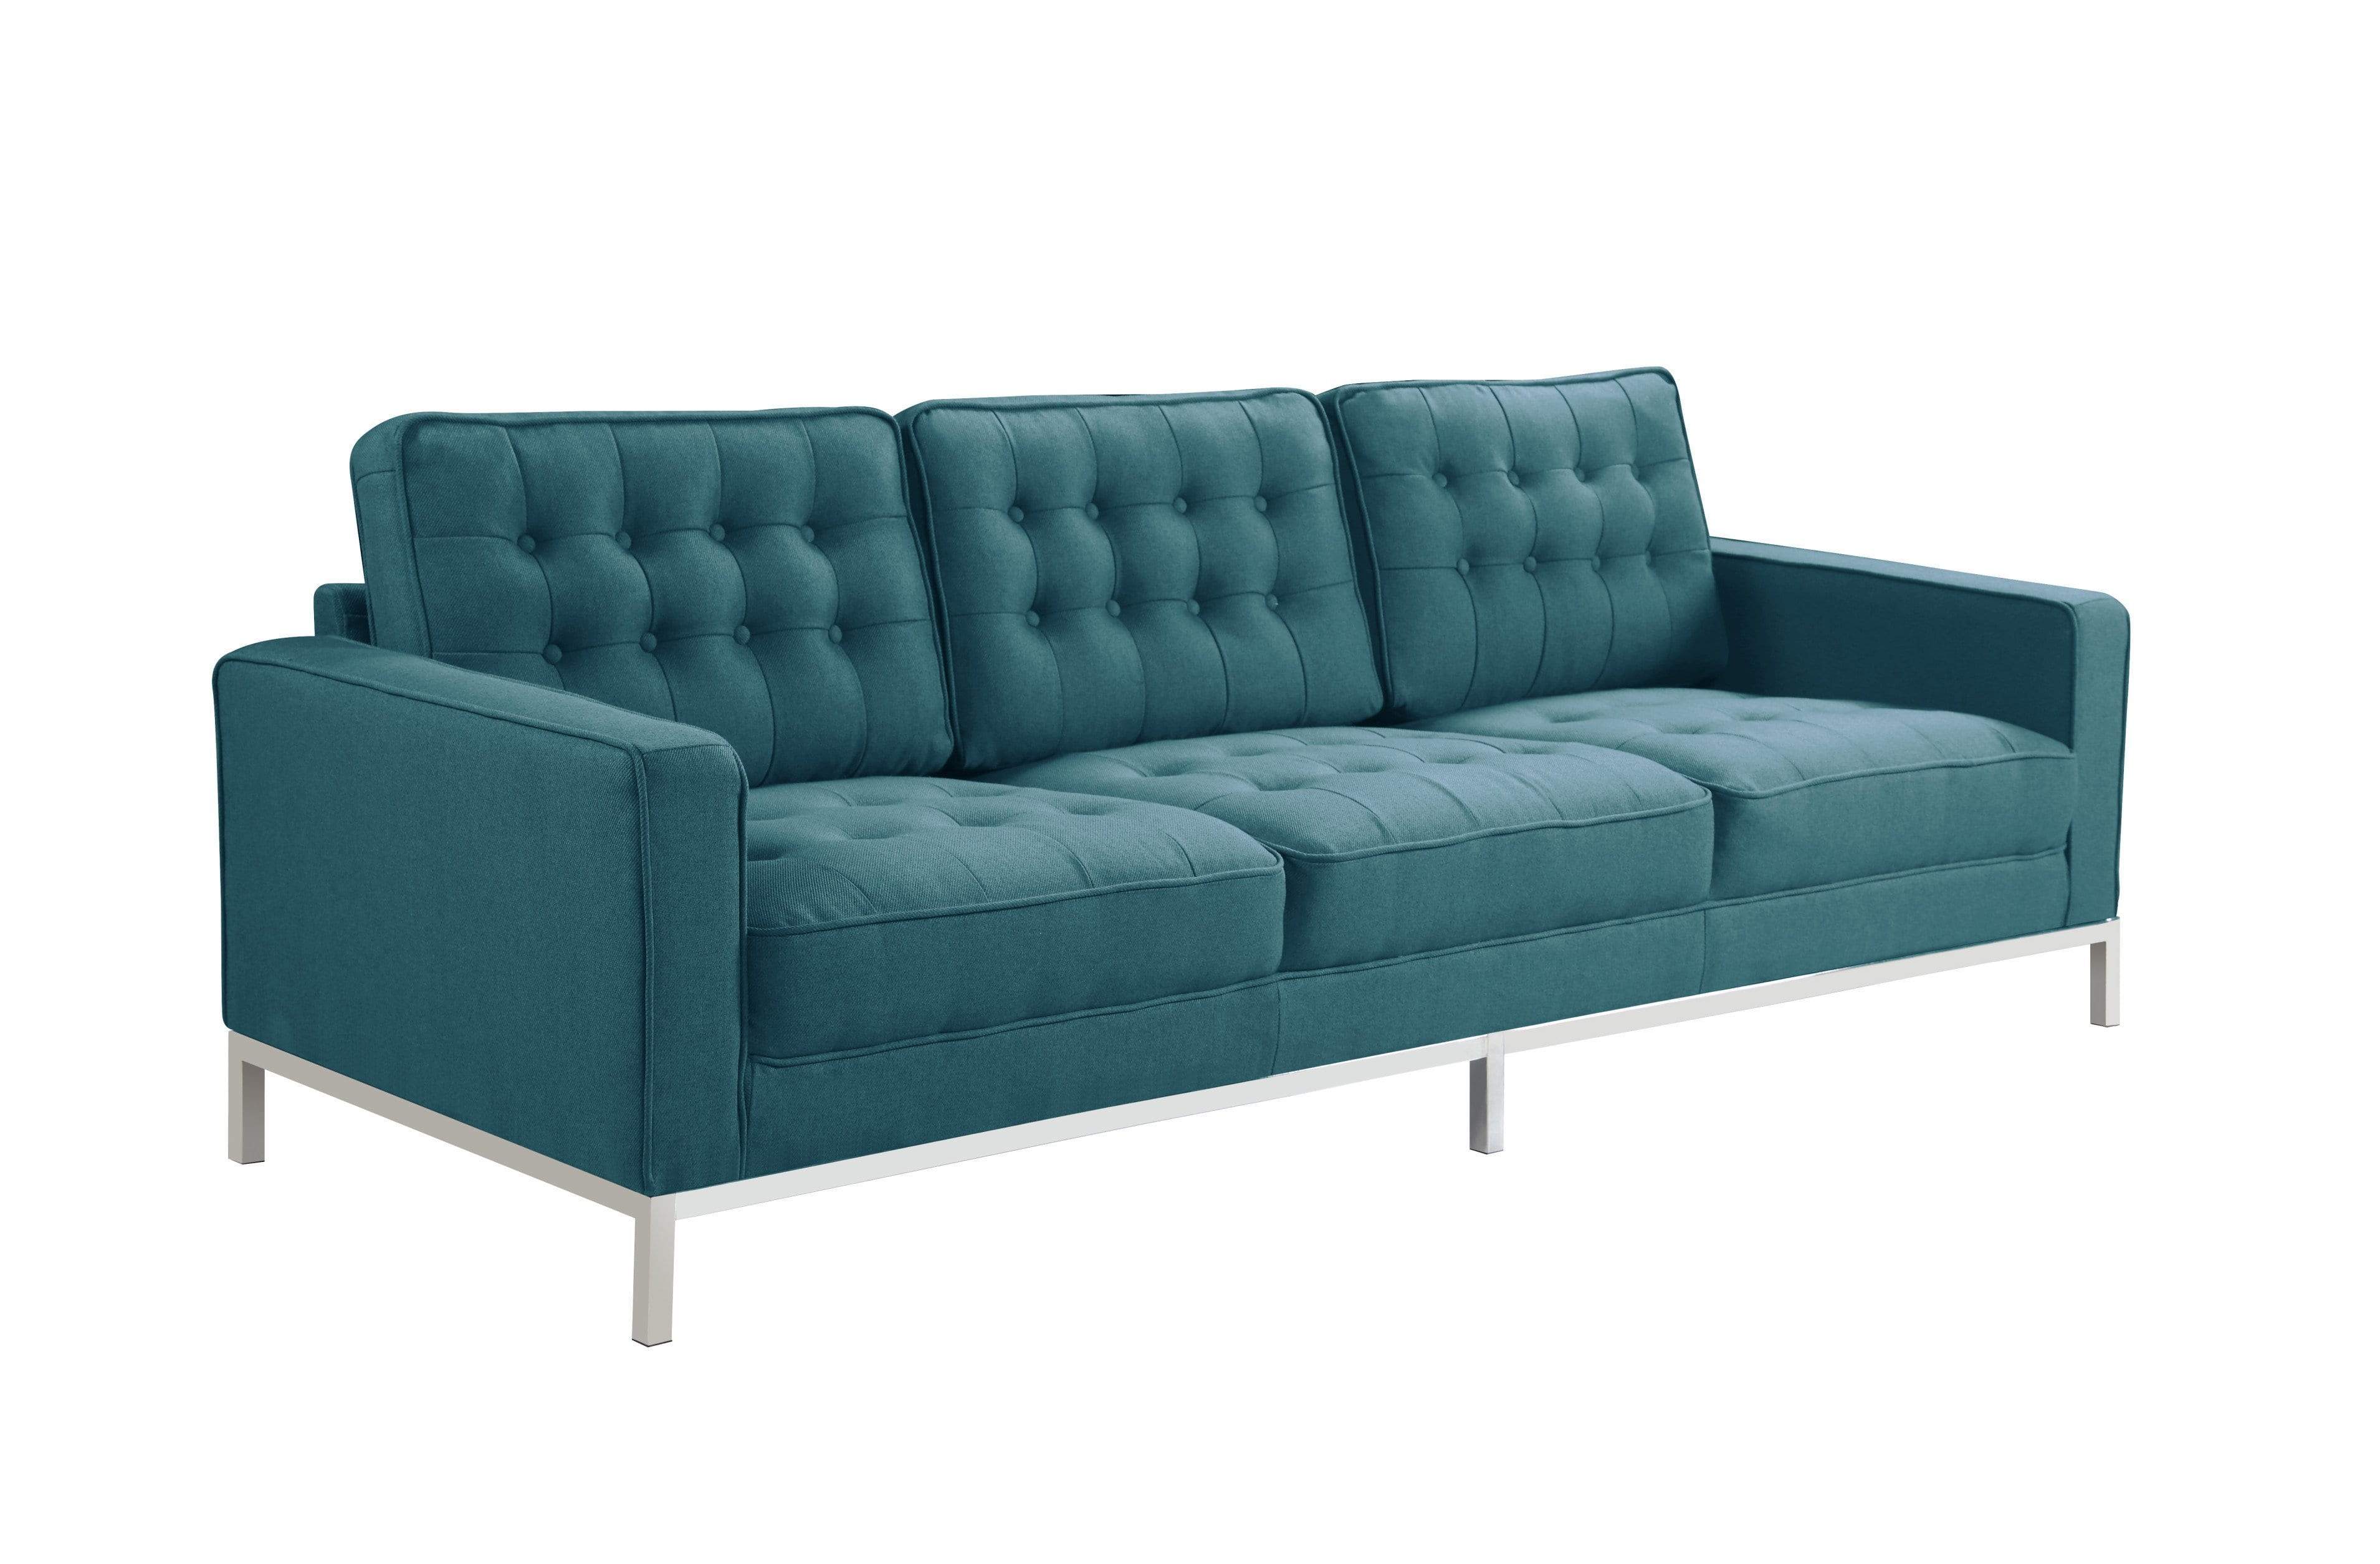 Sterling Three Seat Tufted Linen Sofa